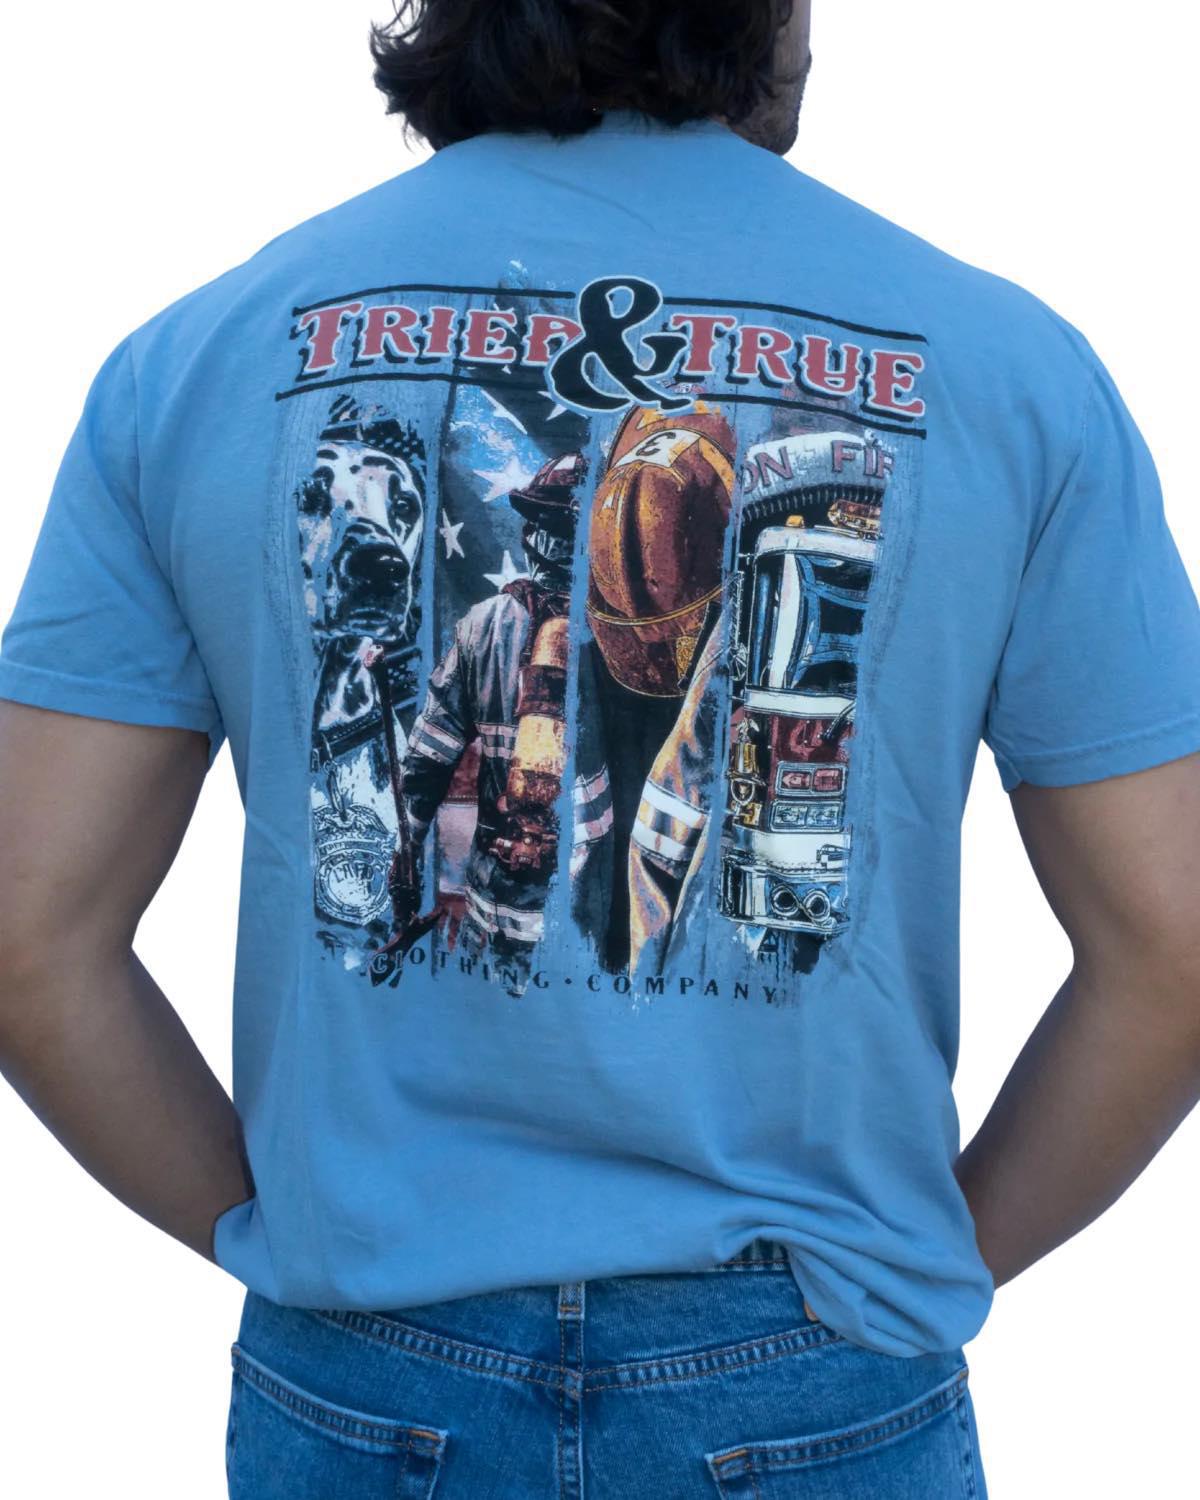 Fire Fighters Blue Tee